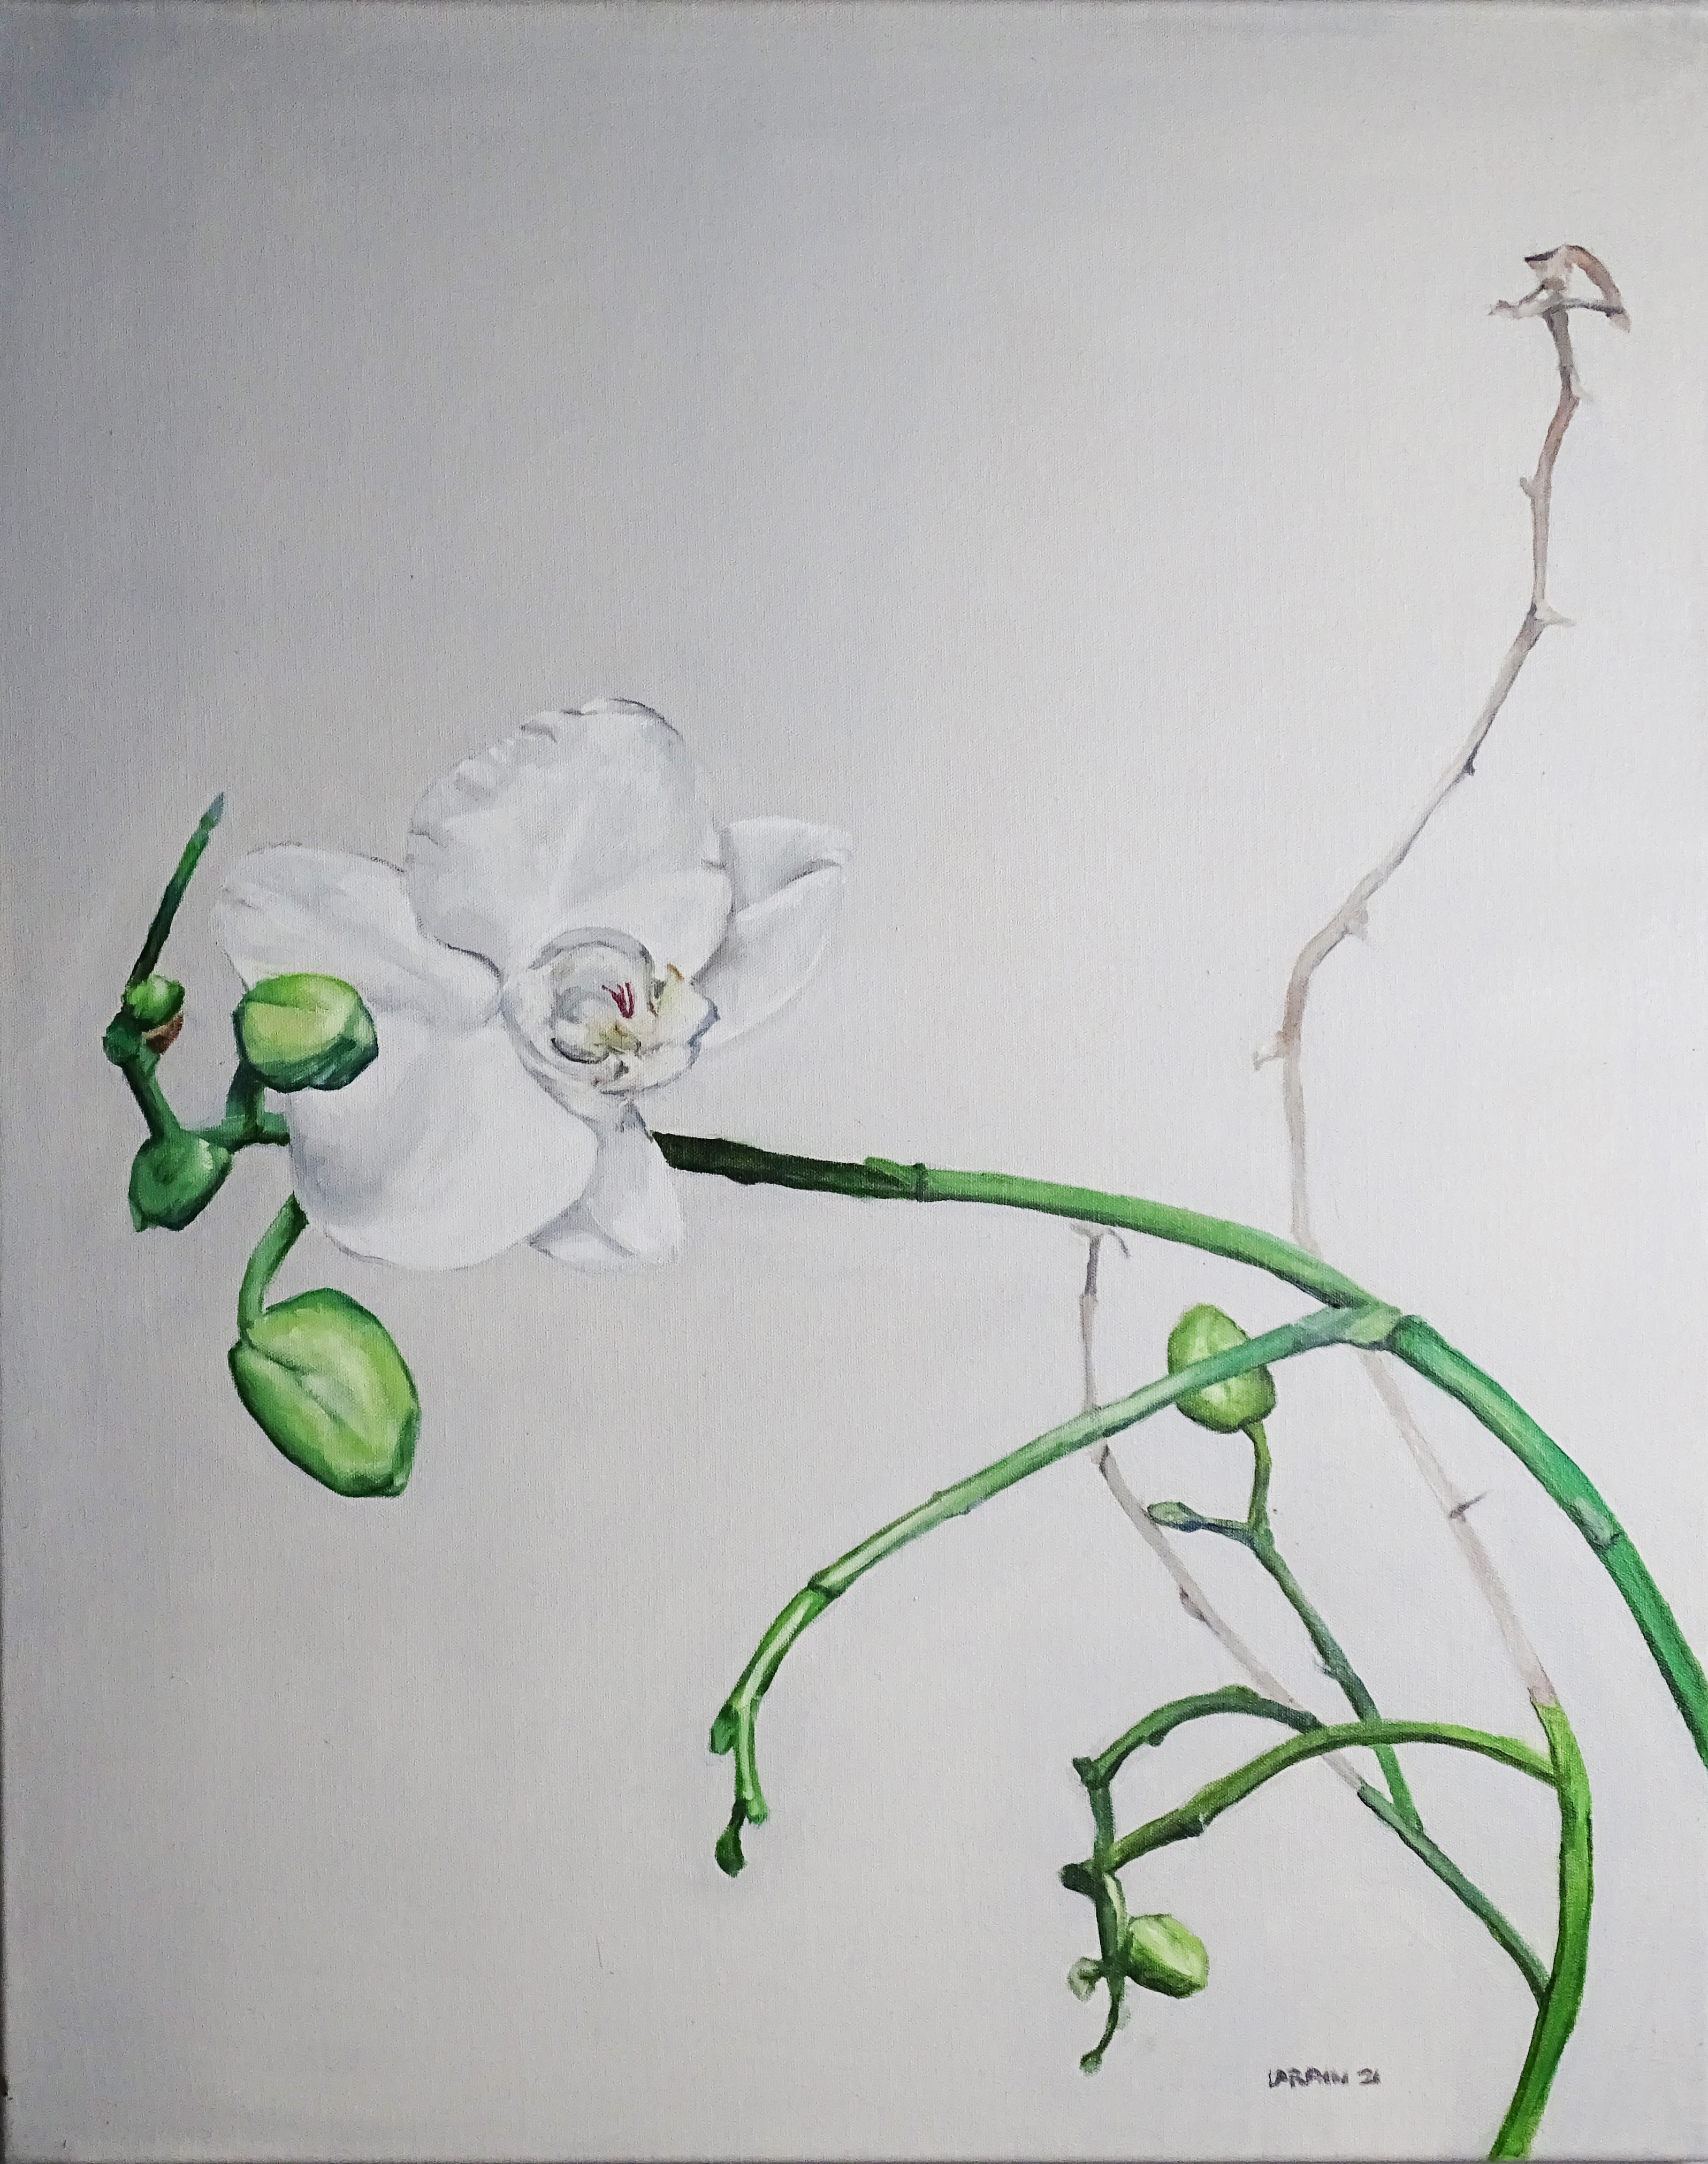 Larain Briggs, "Transient Orchid", unframed oil on canvas, 2021, 76 x 61cm. Painted in oils on